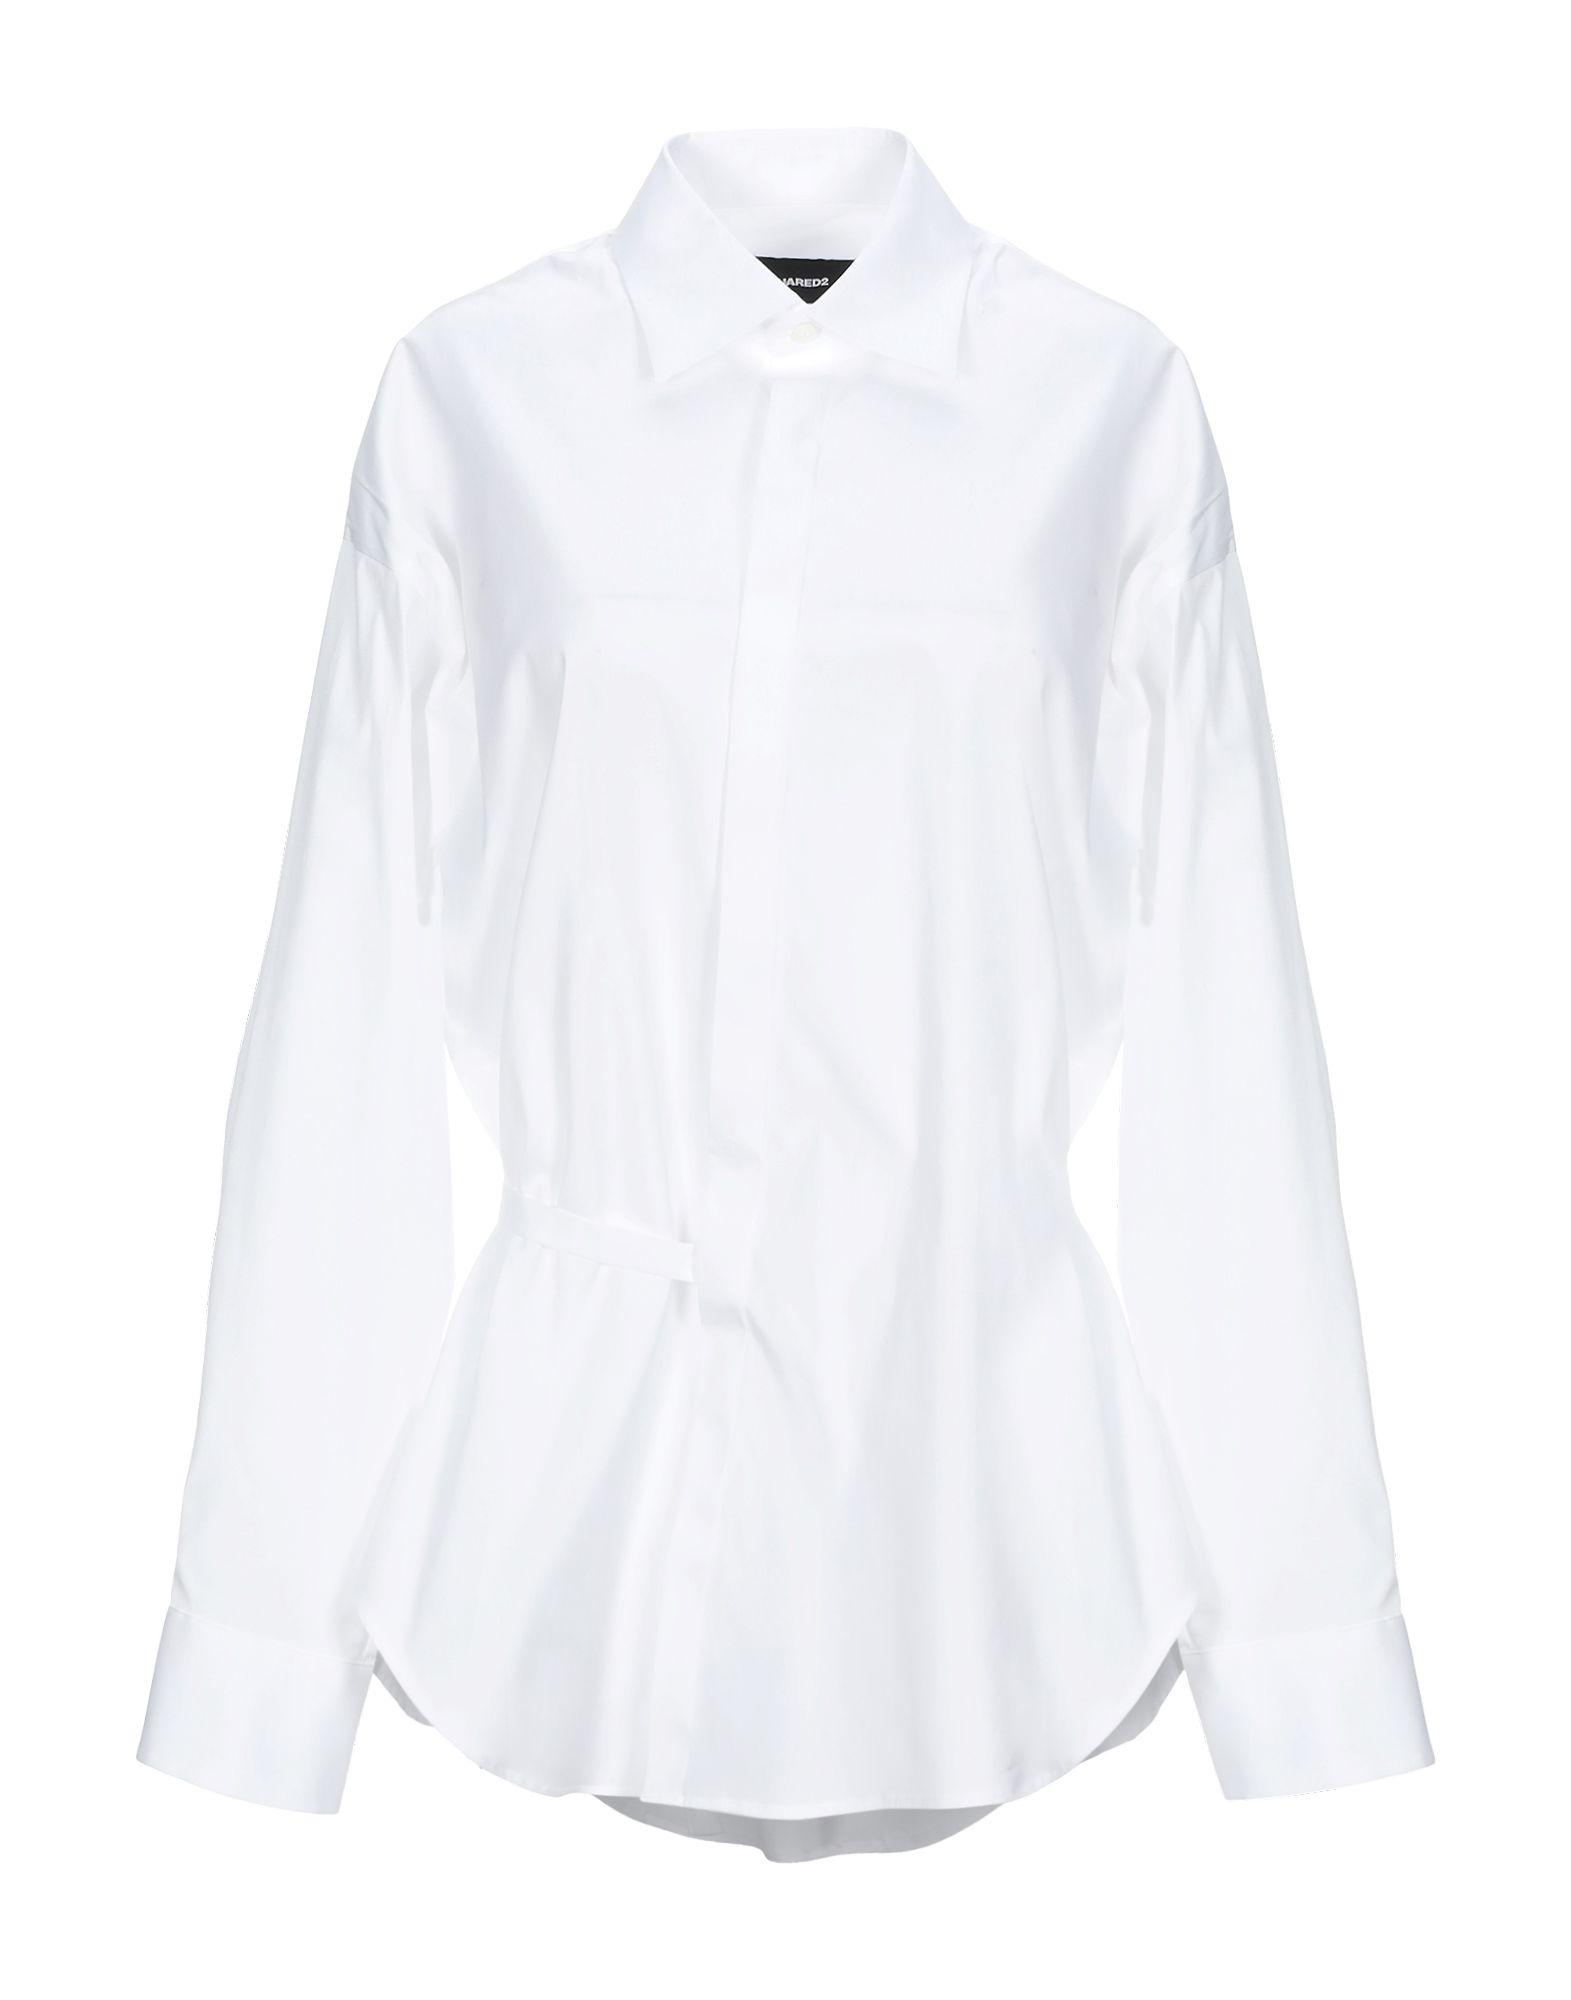 DSquared² Shirt in White - Lyst